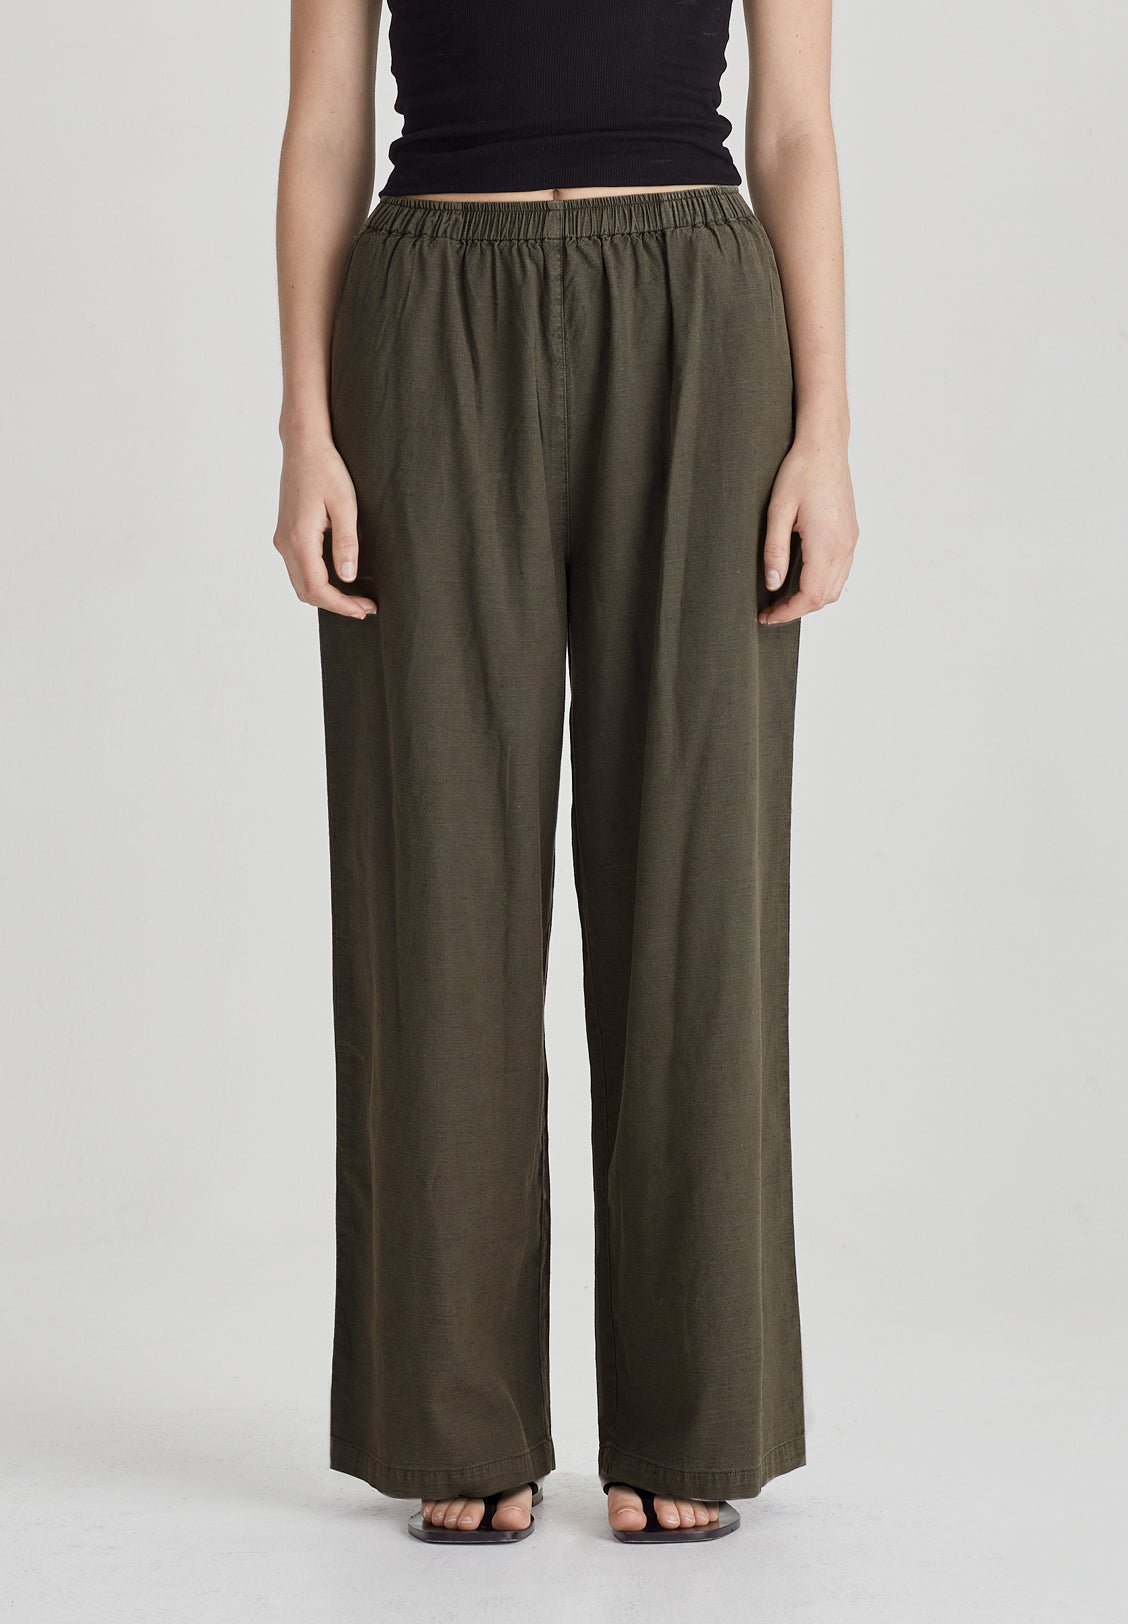 Commoners Linen Blend Pull on Pant - Olive Grey